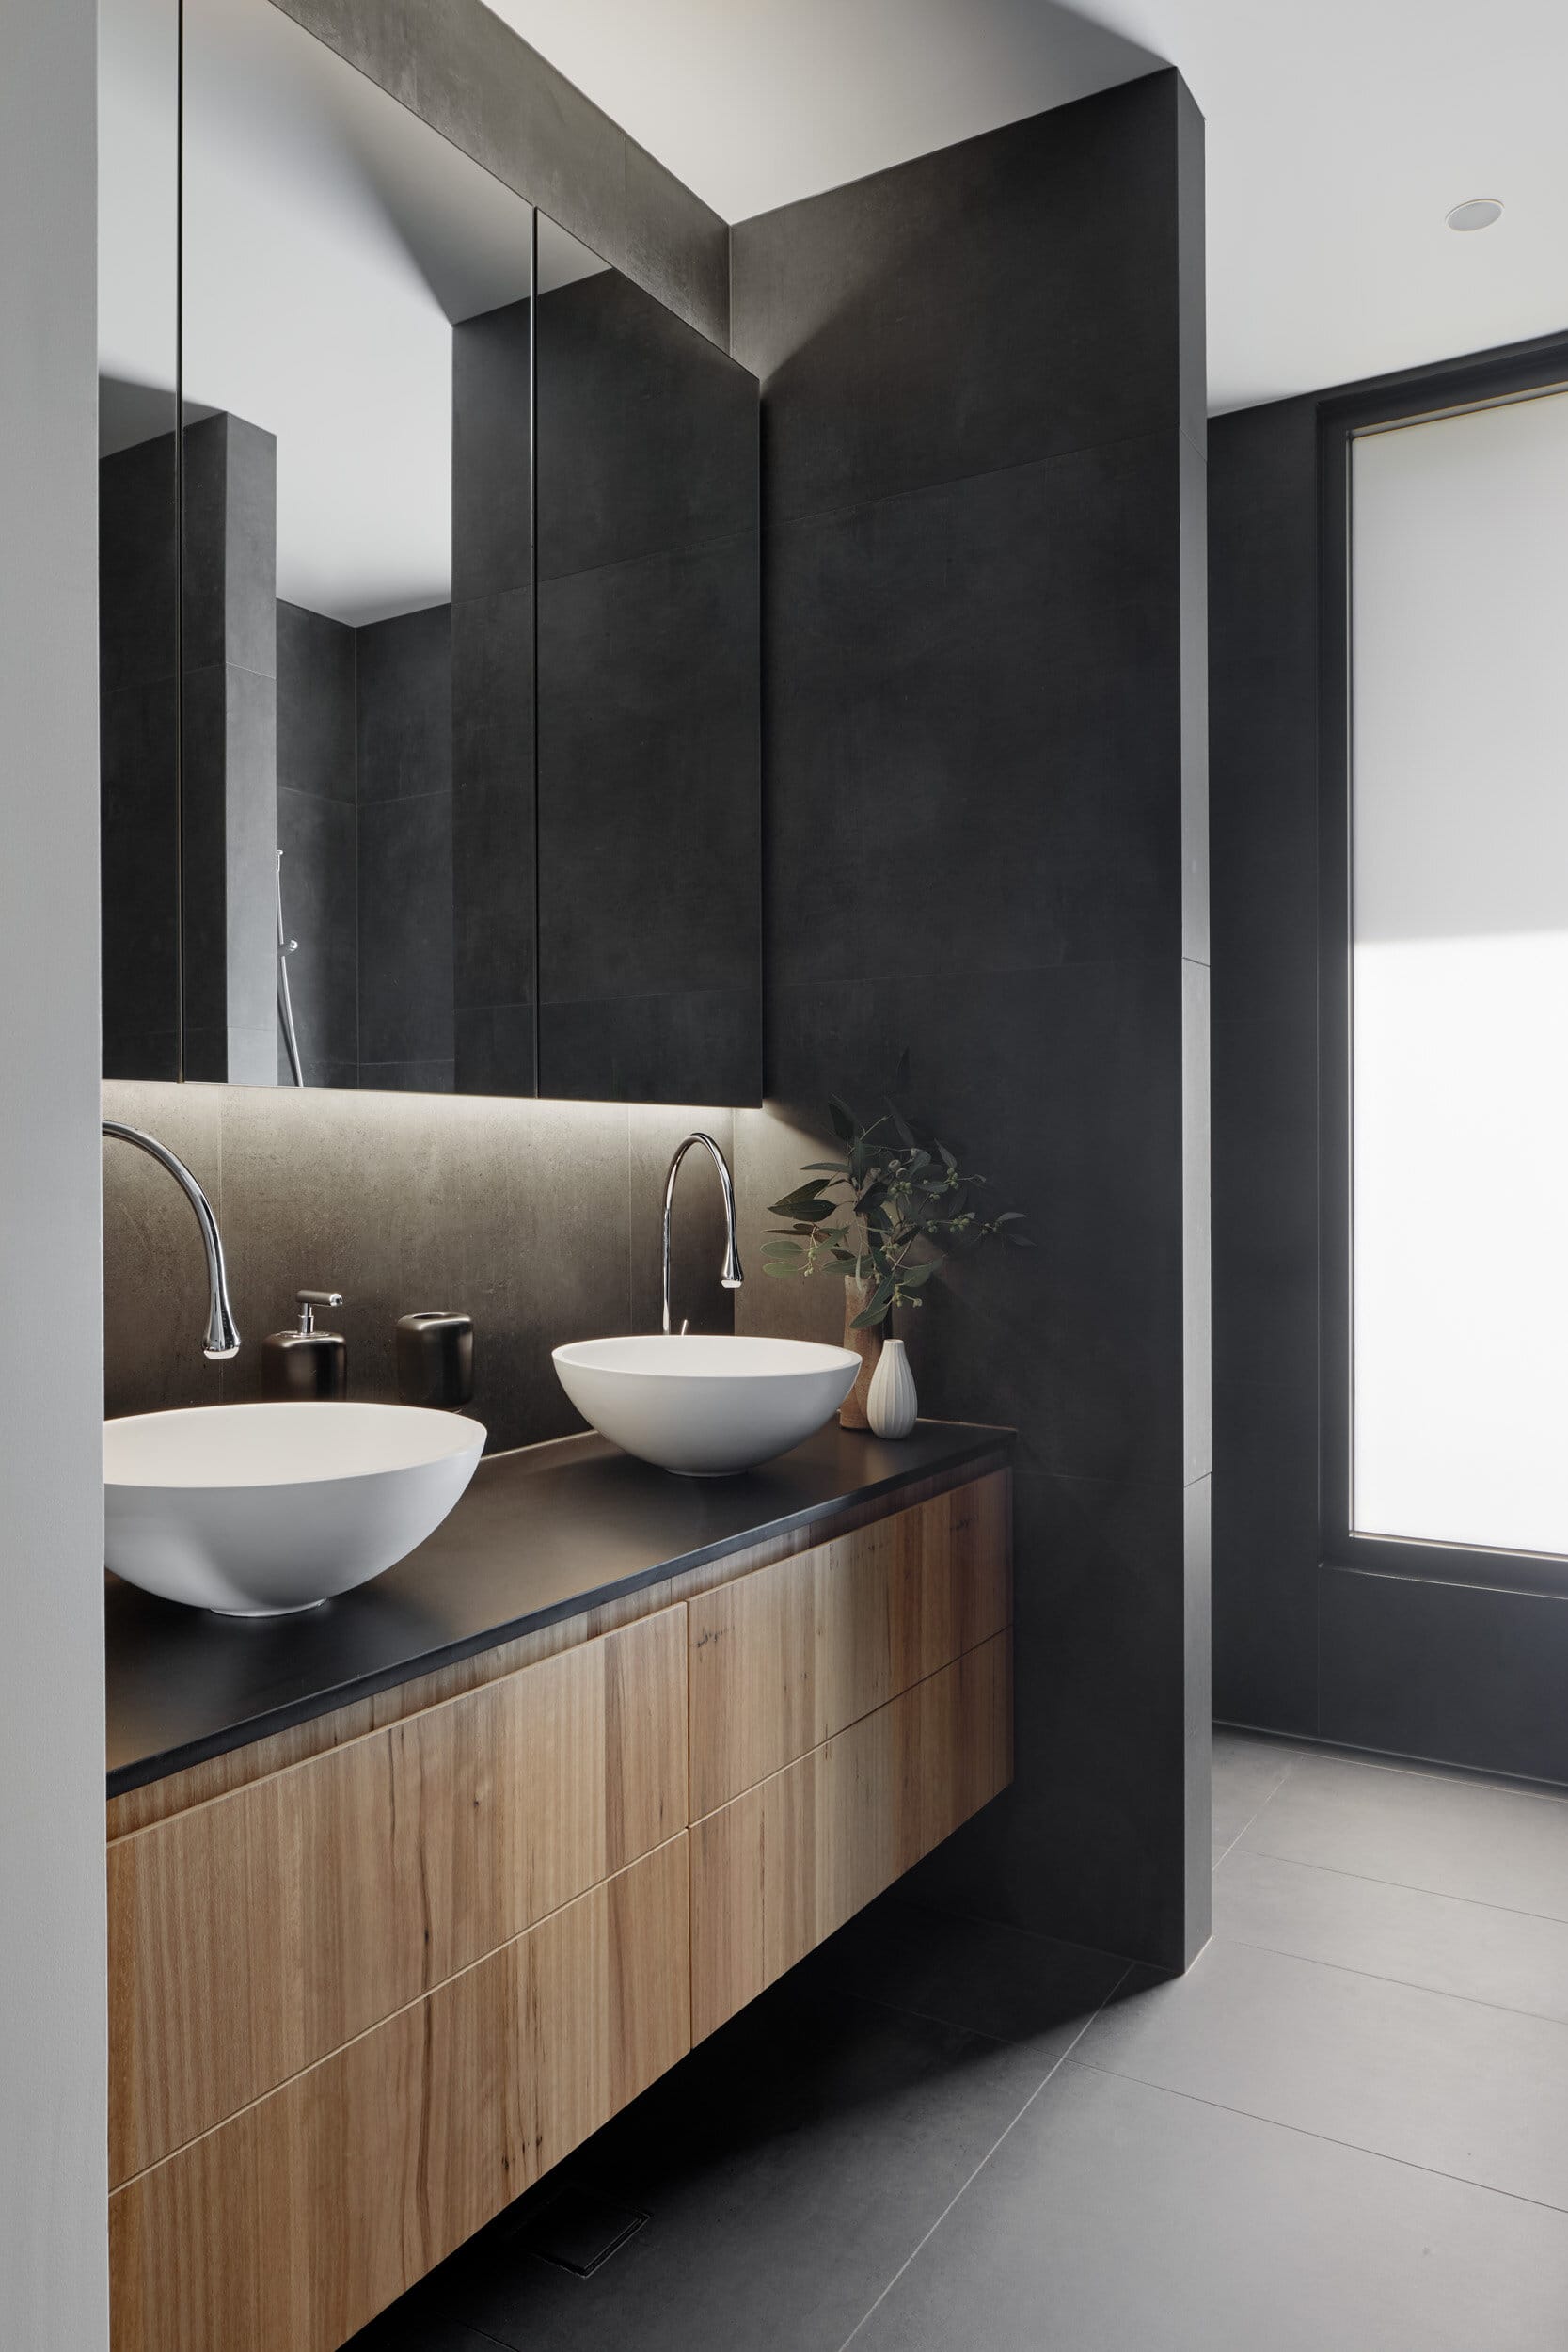 Laurel Grove by Kirsten Johnstone Architecture. Photography by Tatjana Plitt. Timber bathroom vanity with black countertop and two freestanding sink bowls. Dark walls and mirrors.